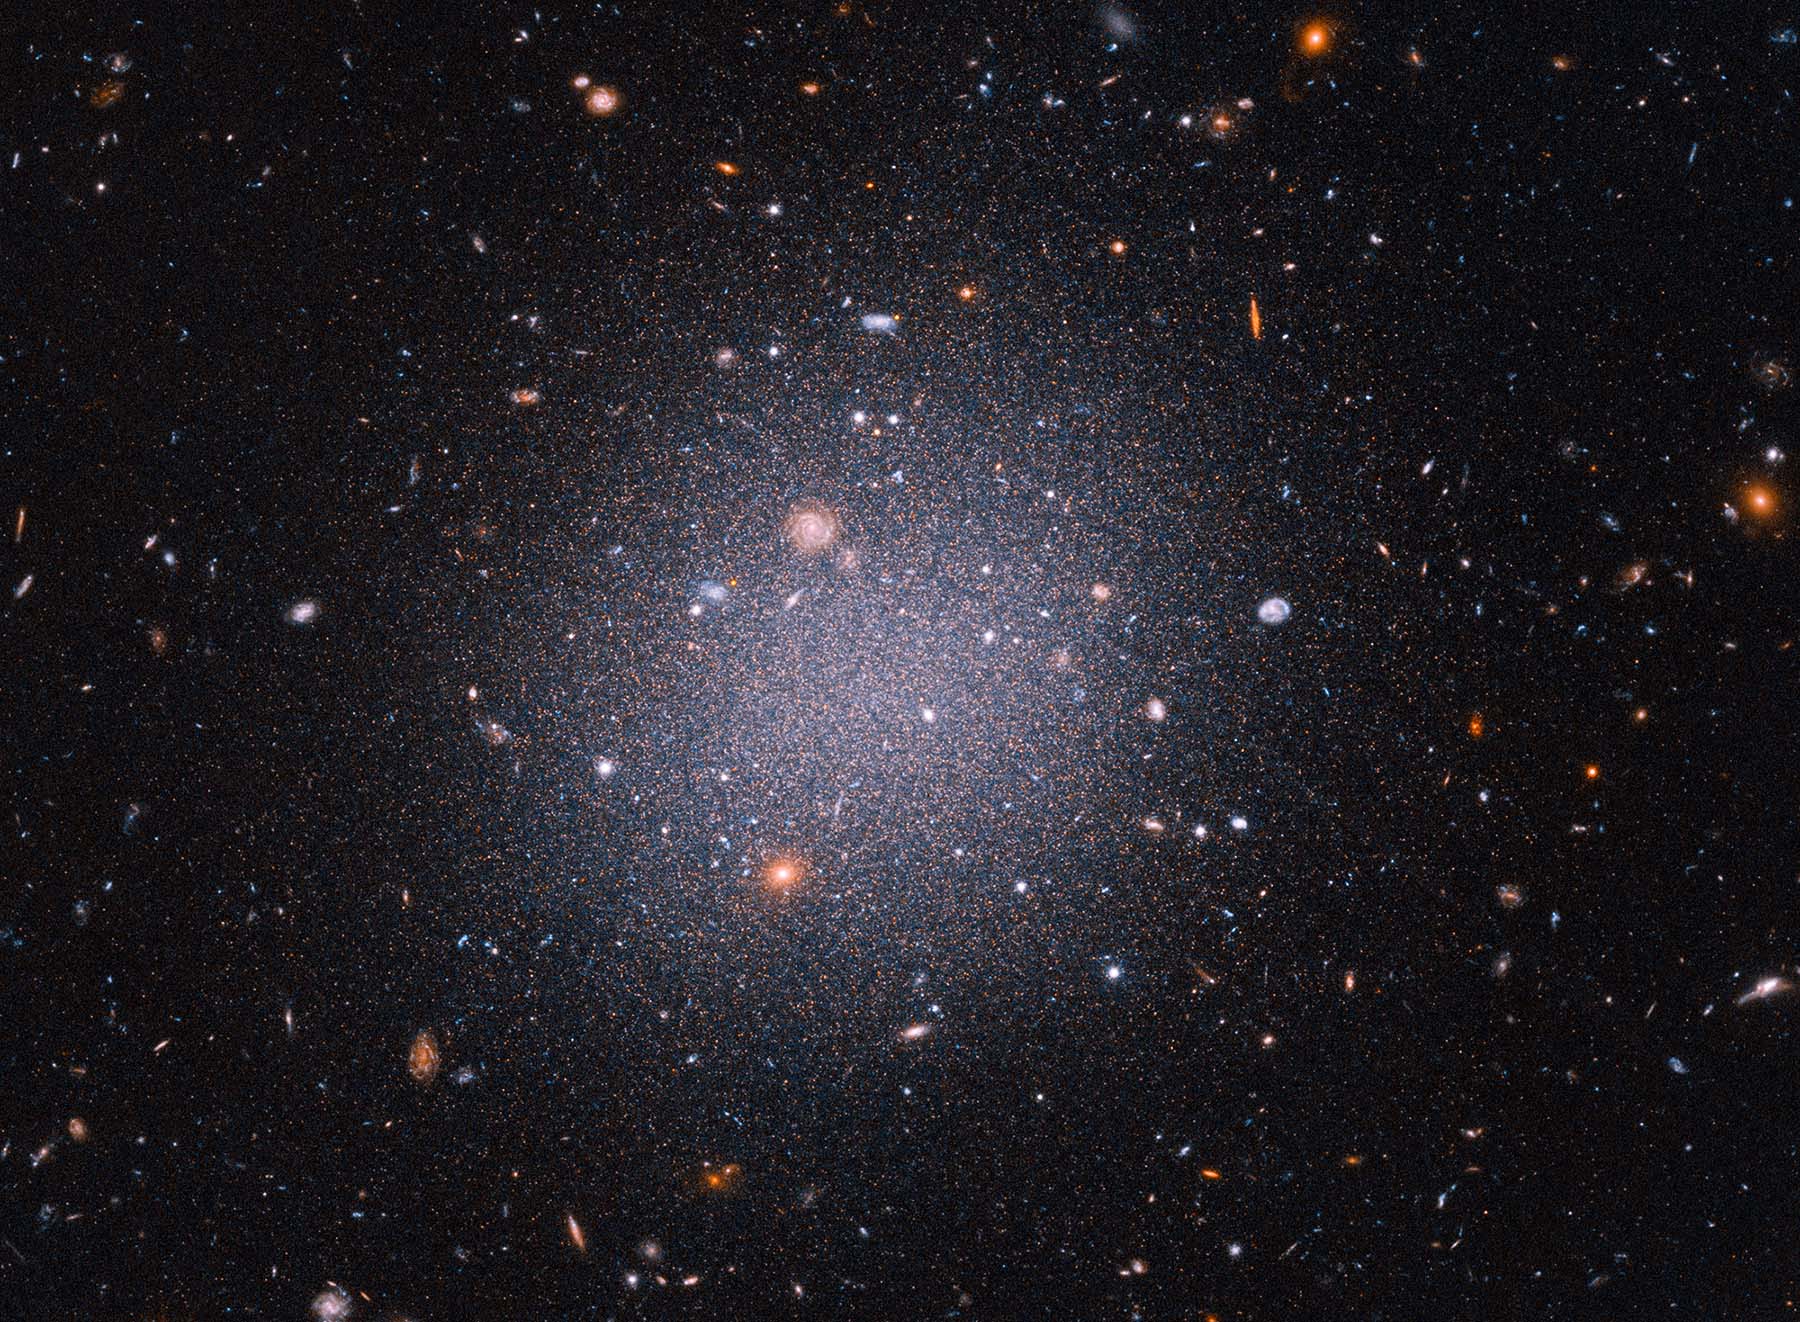 This Hubble Space Telescope snapshot reveals an unusual galaxy that researchers call a “see-through galaxy.” The giant cosmic cotton ball is so diffuse and its ancient stars are so spread out that distant galaxies in the background can be seen through it.